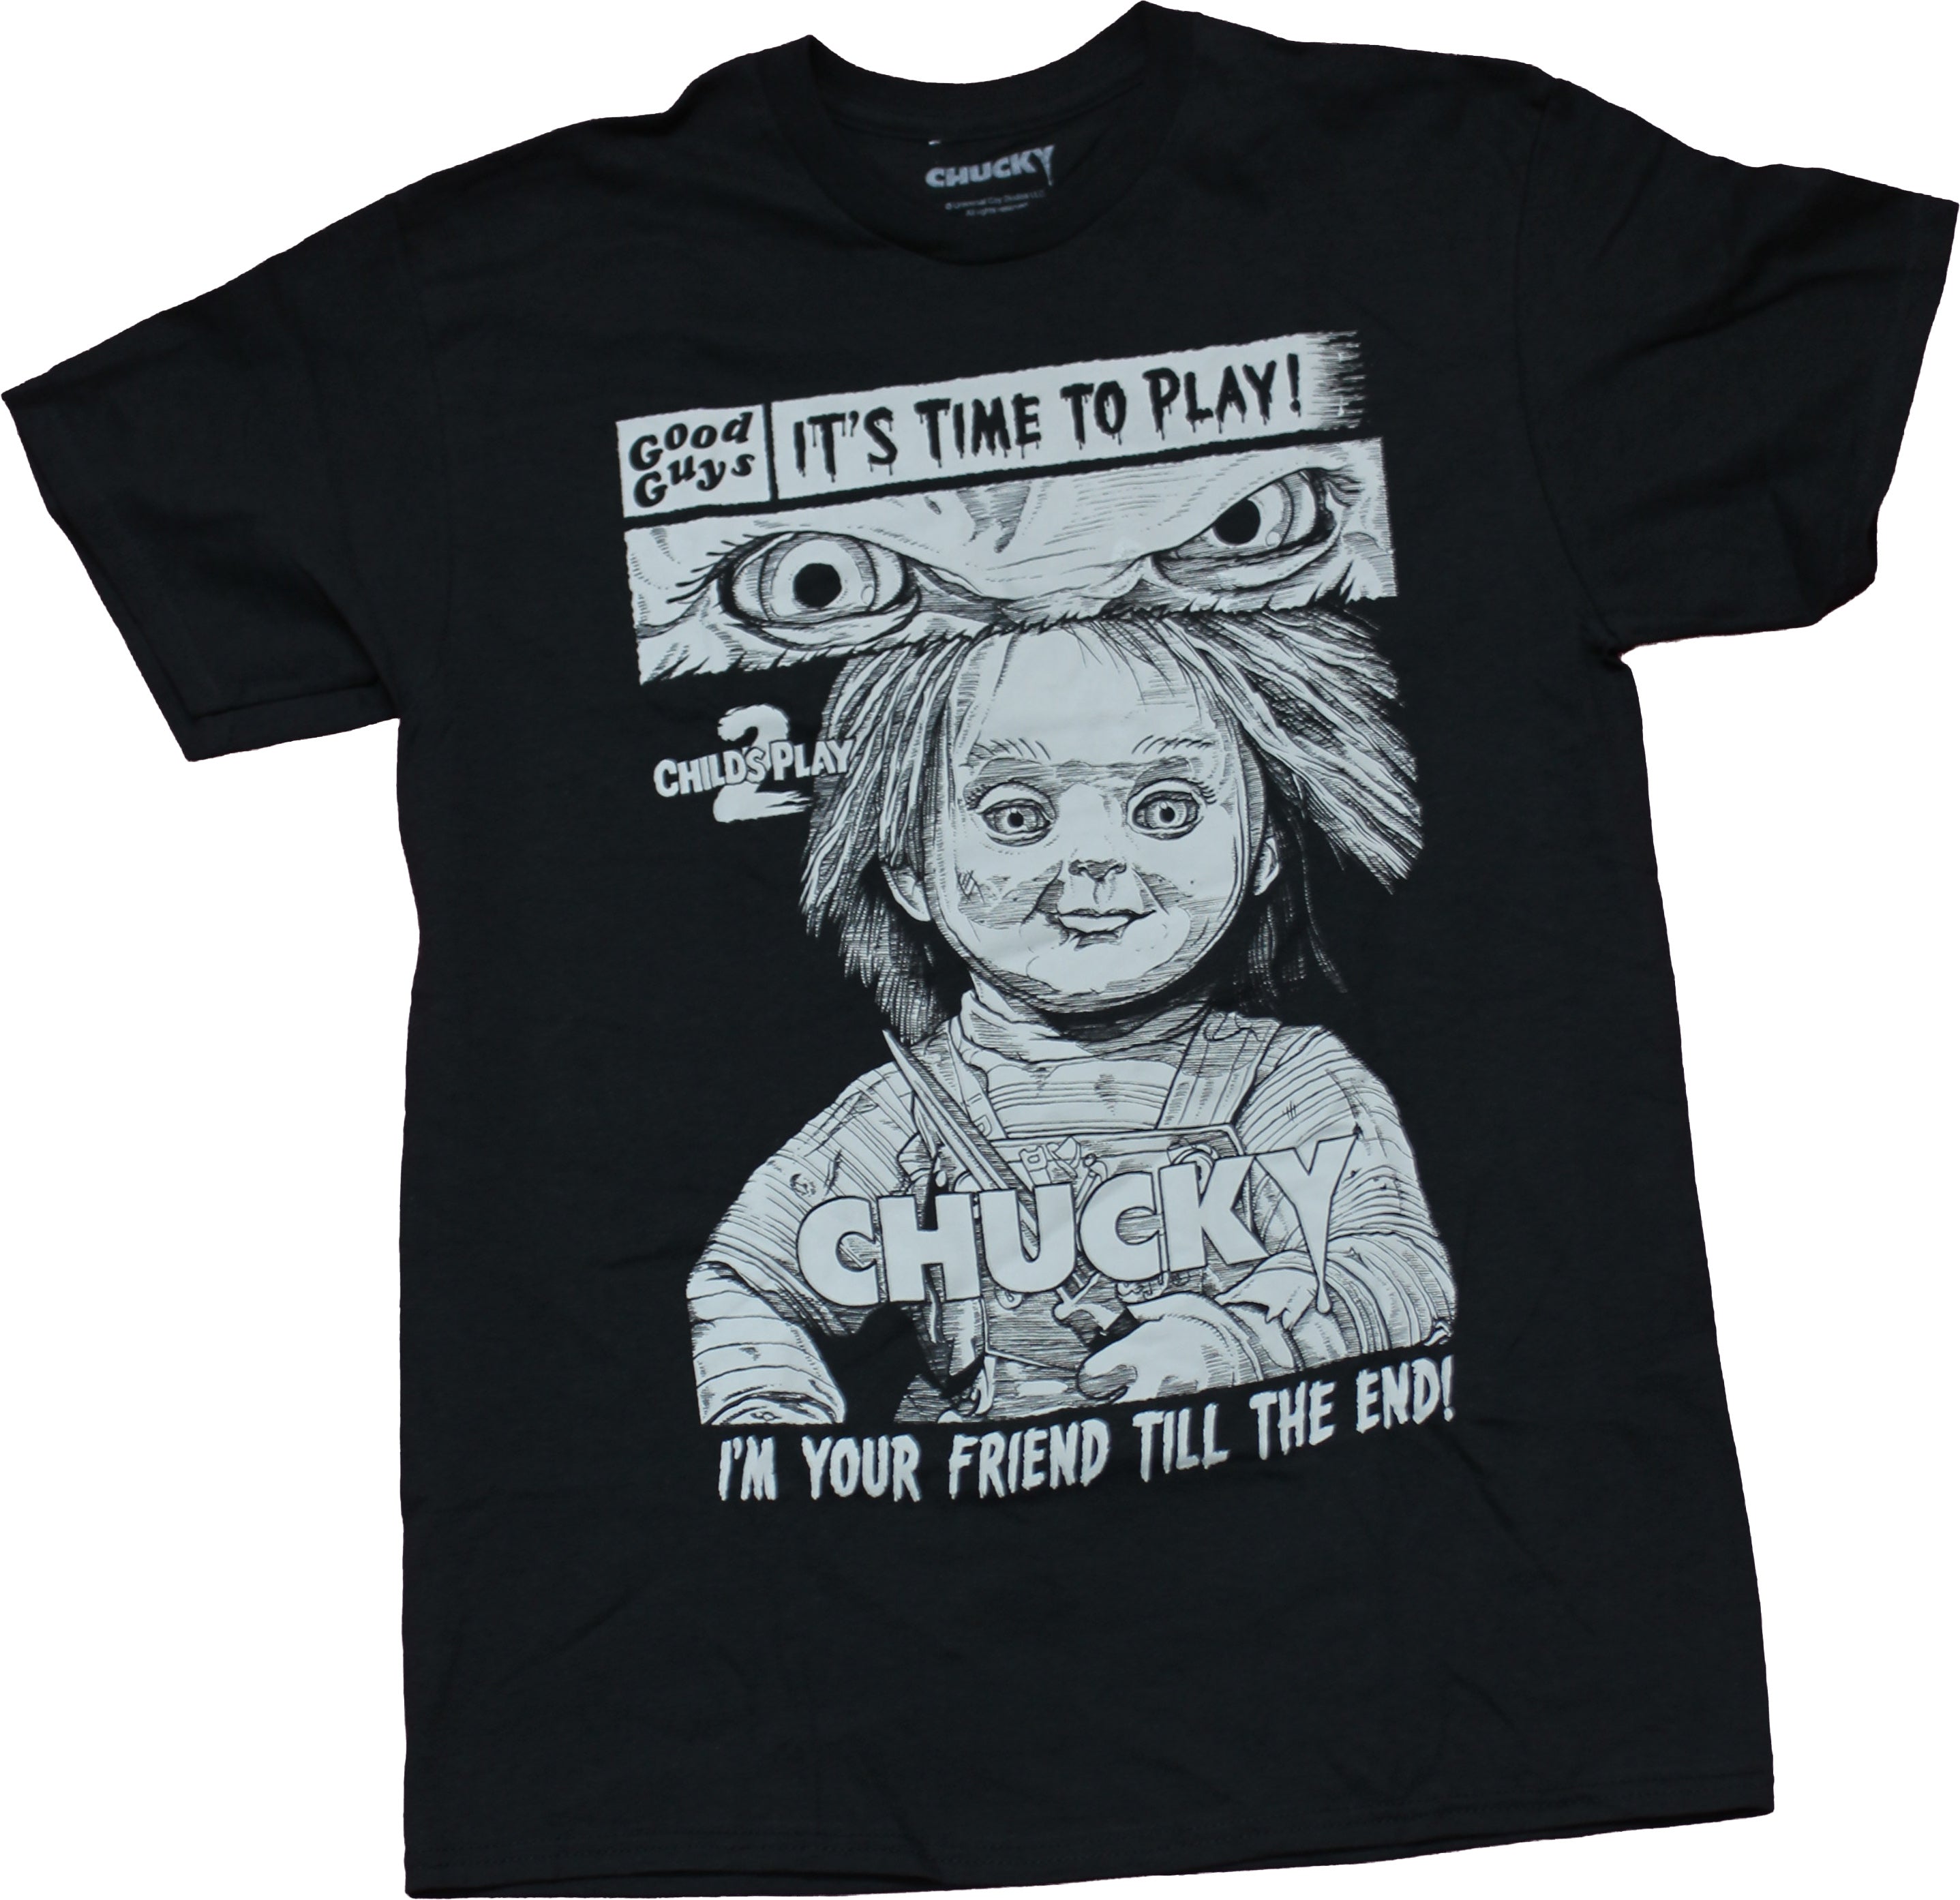 Child's Play 2 Mens T-Shirt - Your Friend till The End Good Guys Last